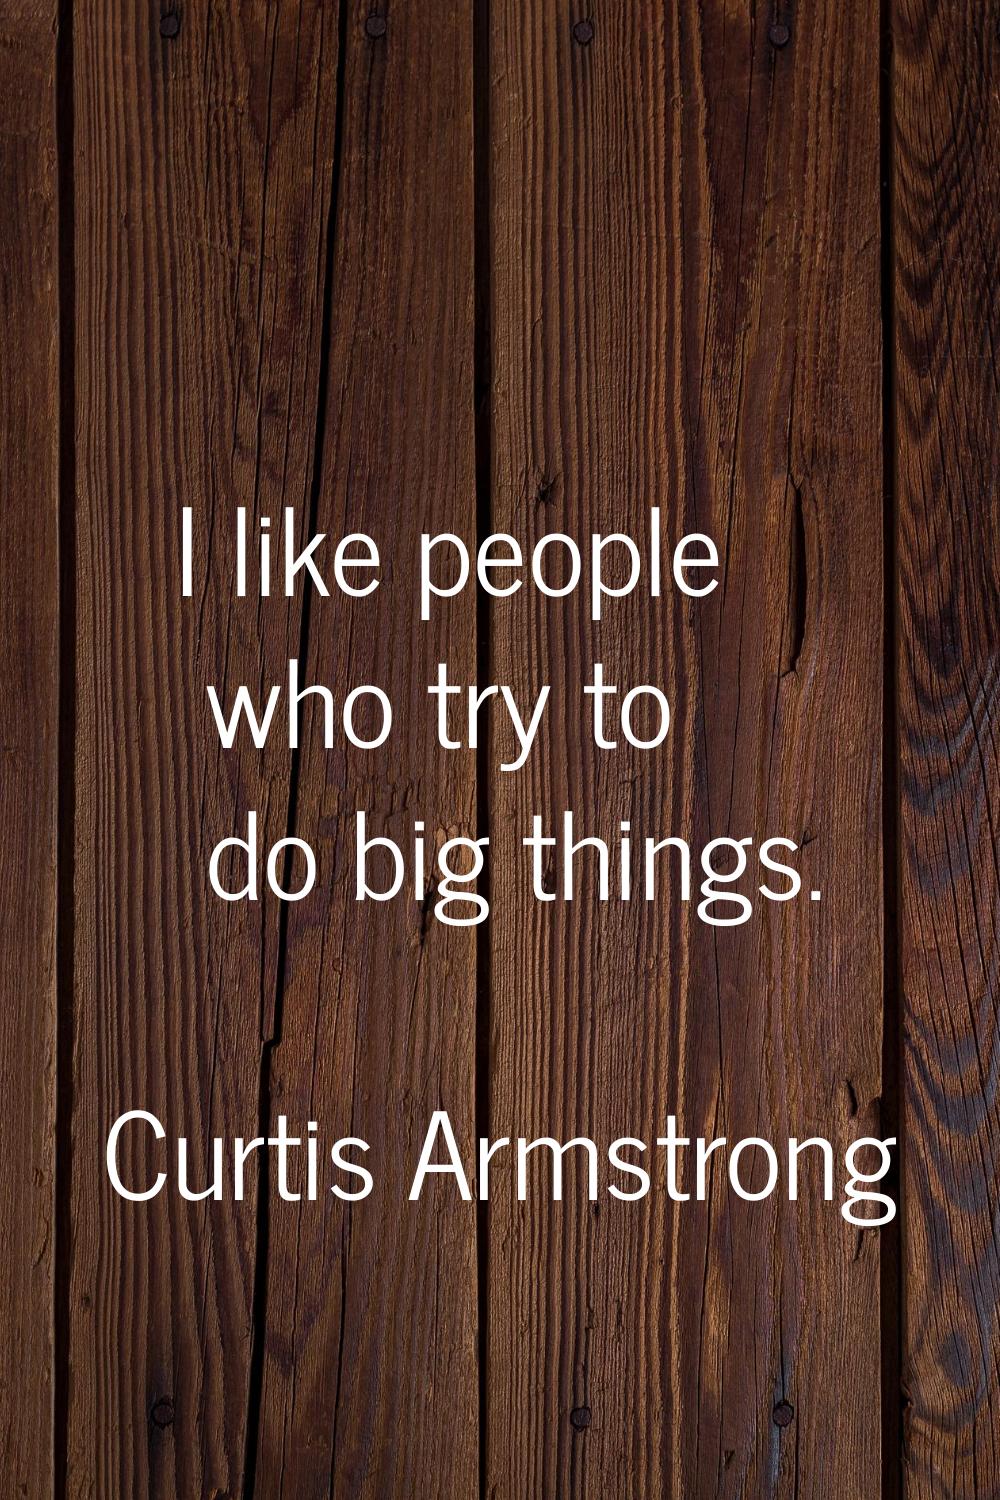 I like people who try to do big things.